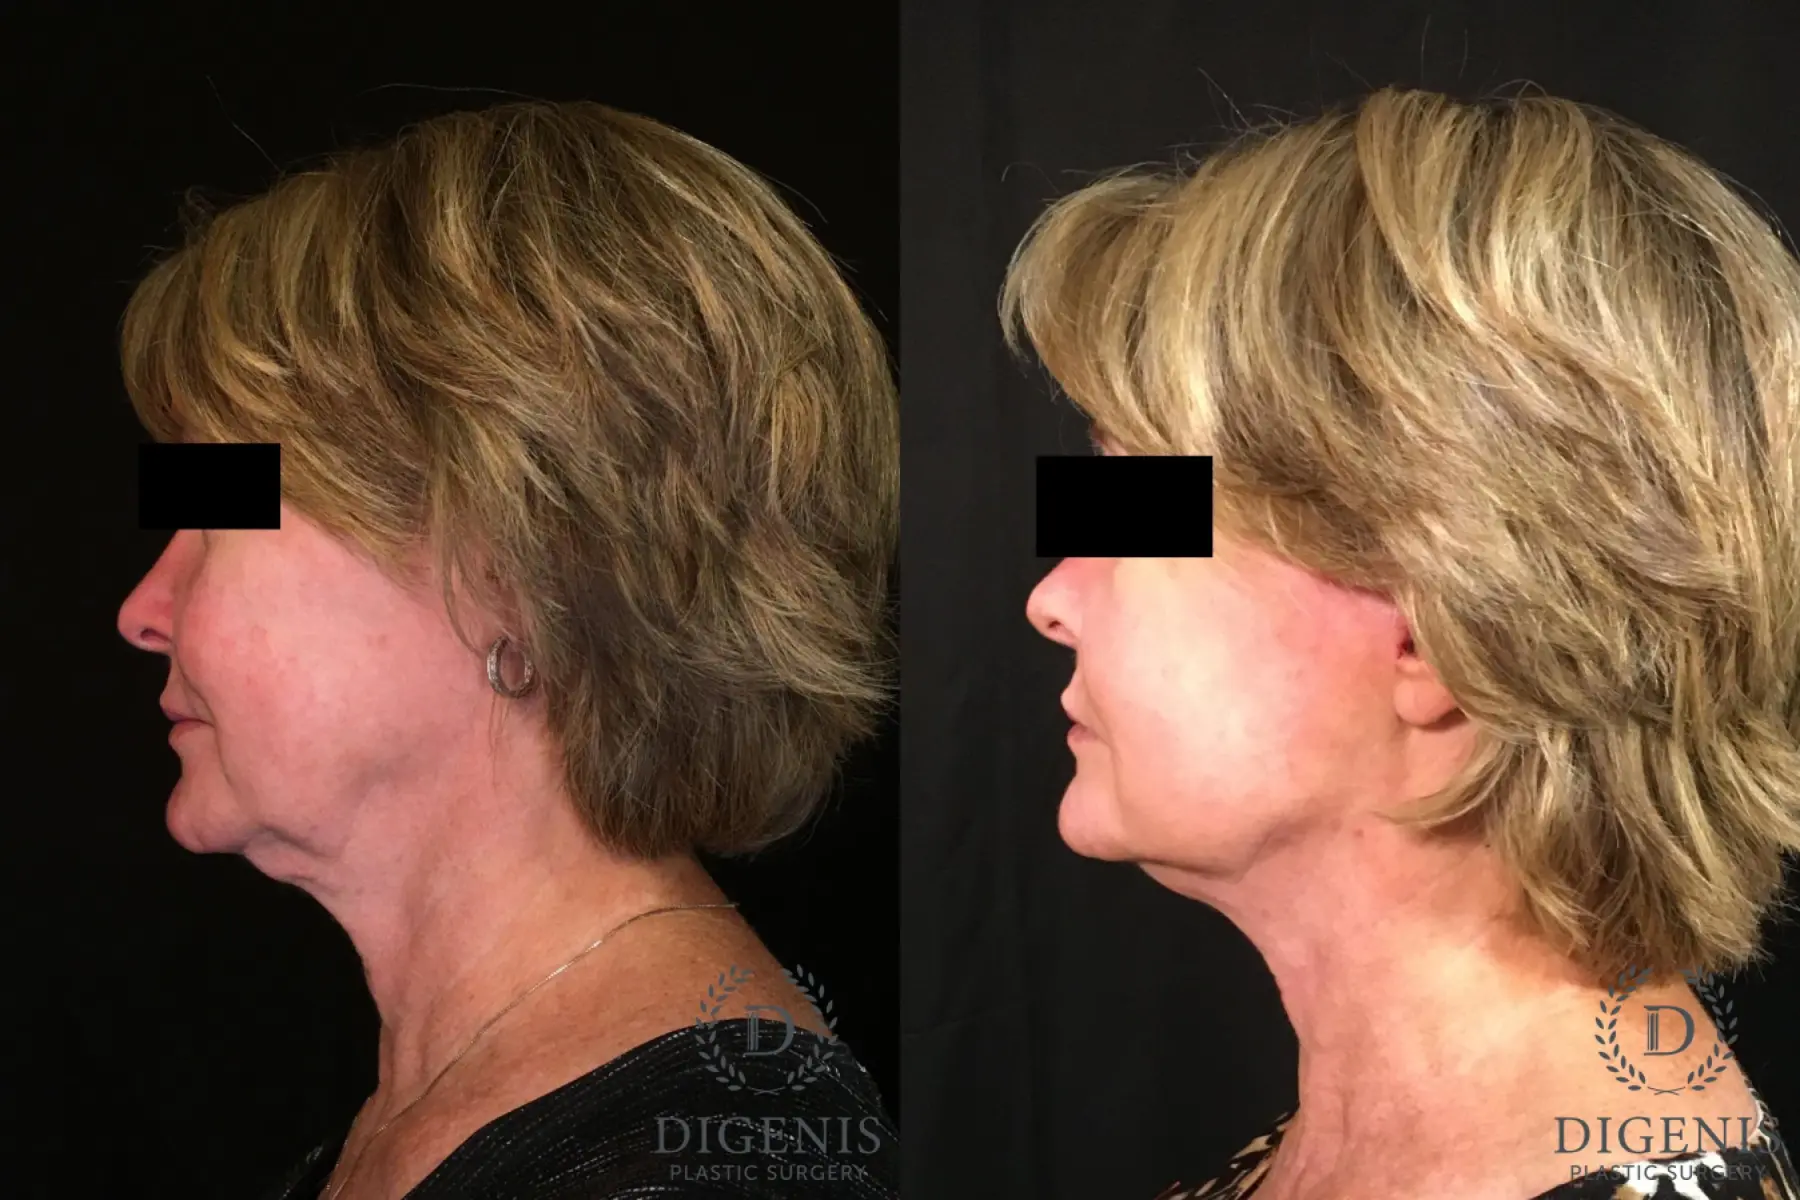 Digenis Refresh Lift: Patient 1 - Before and After 5